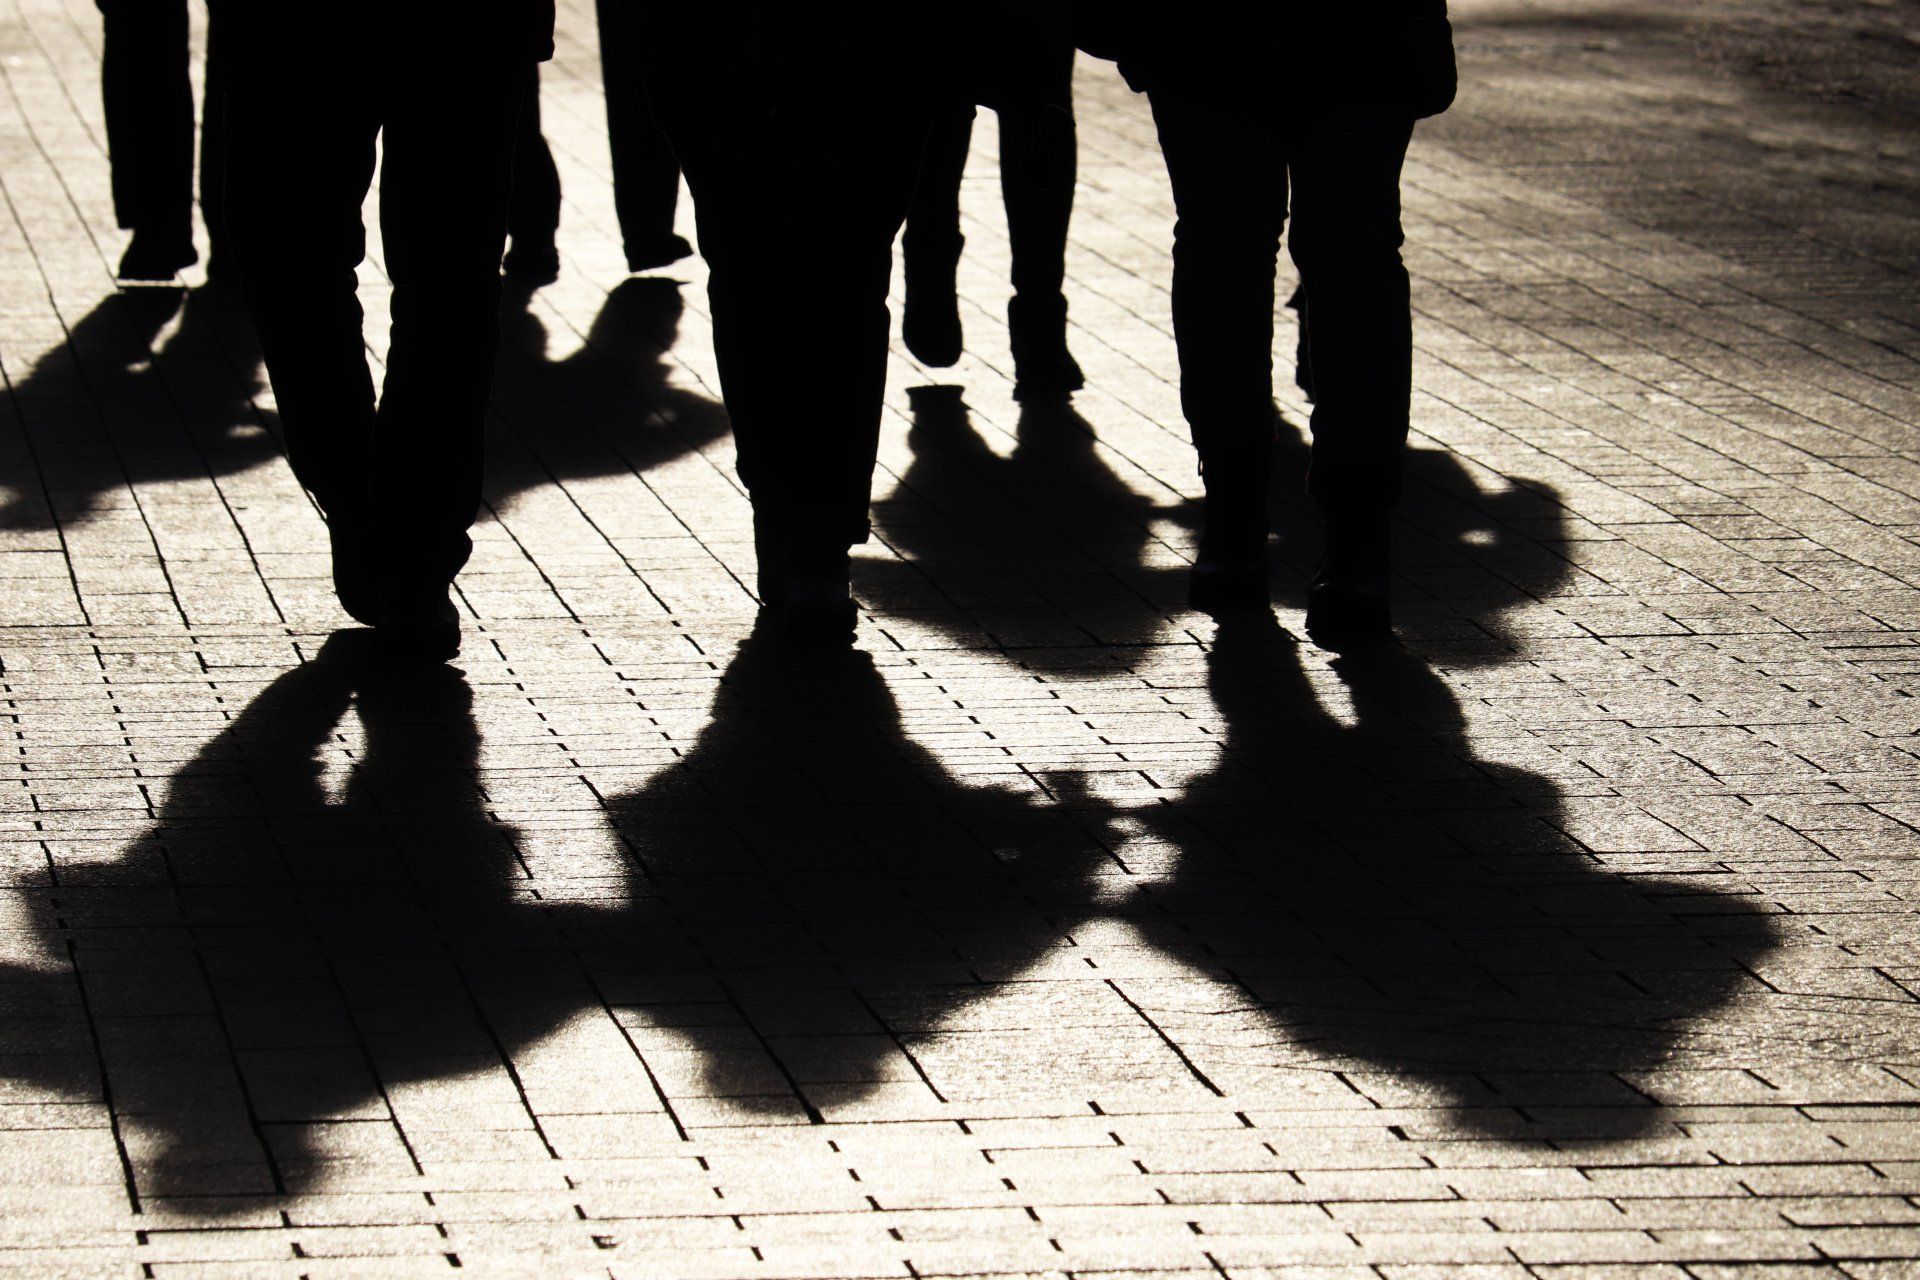 Silhouettes of a group of people walking along a pavement.